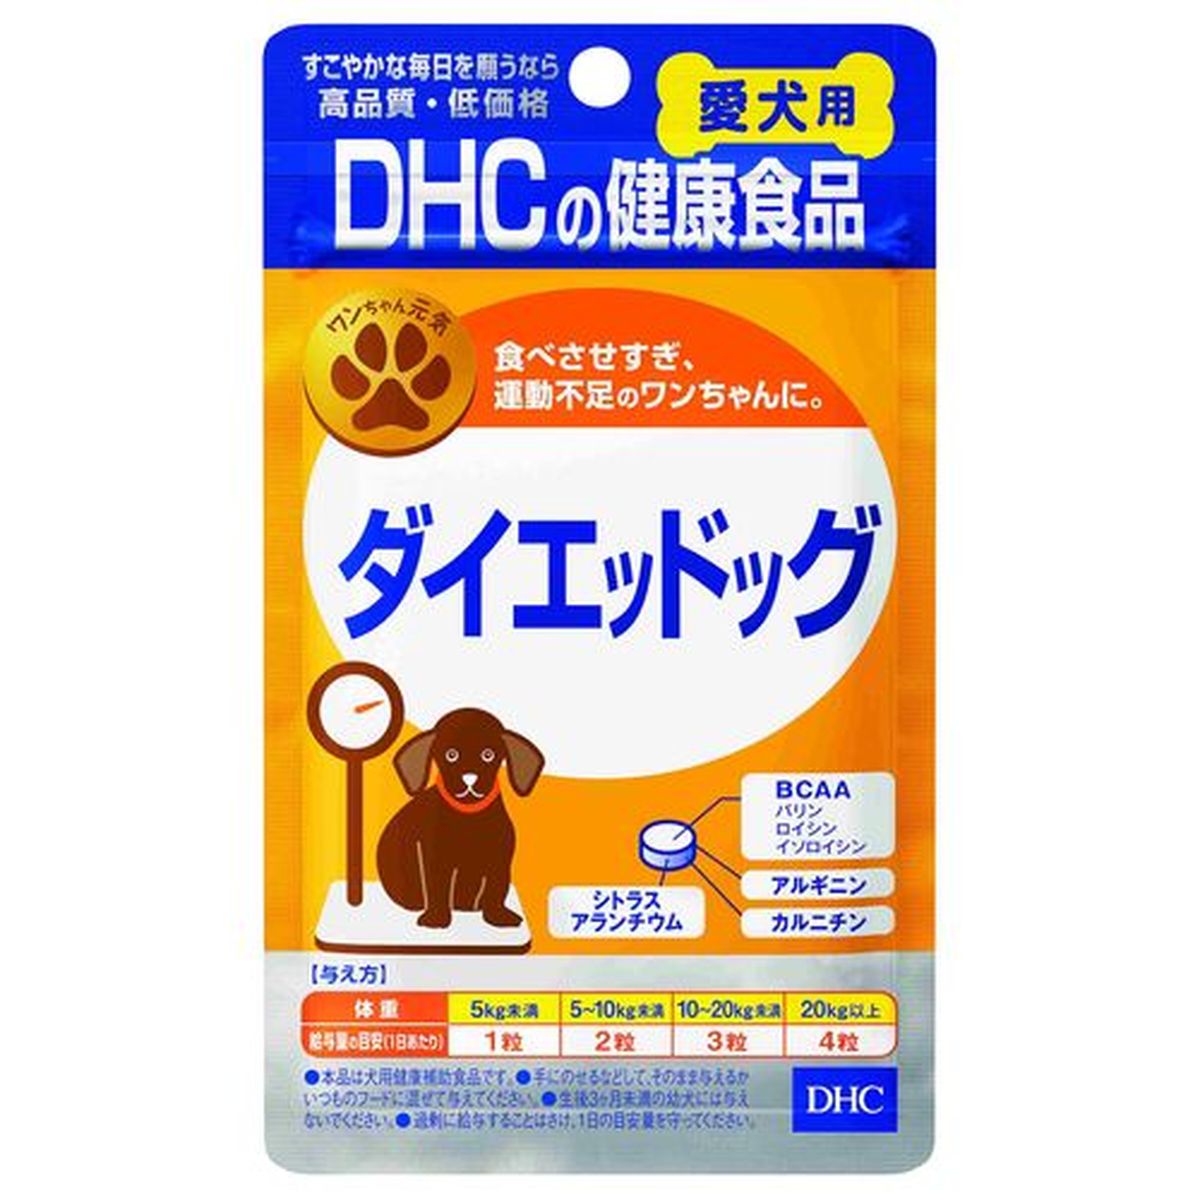 DHC愛犬用ダイエッドッグ 60粒×30